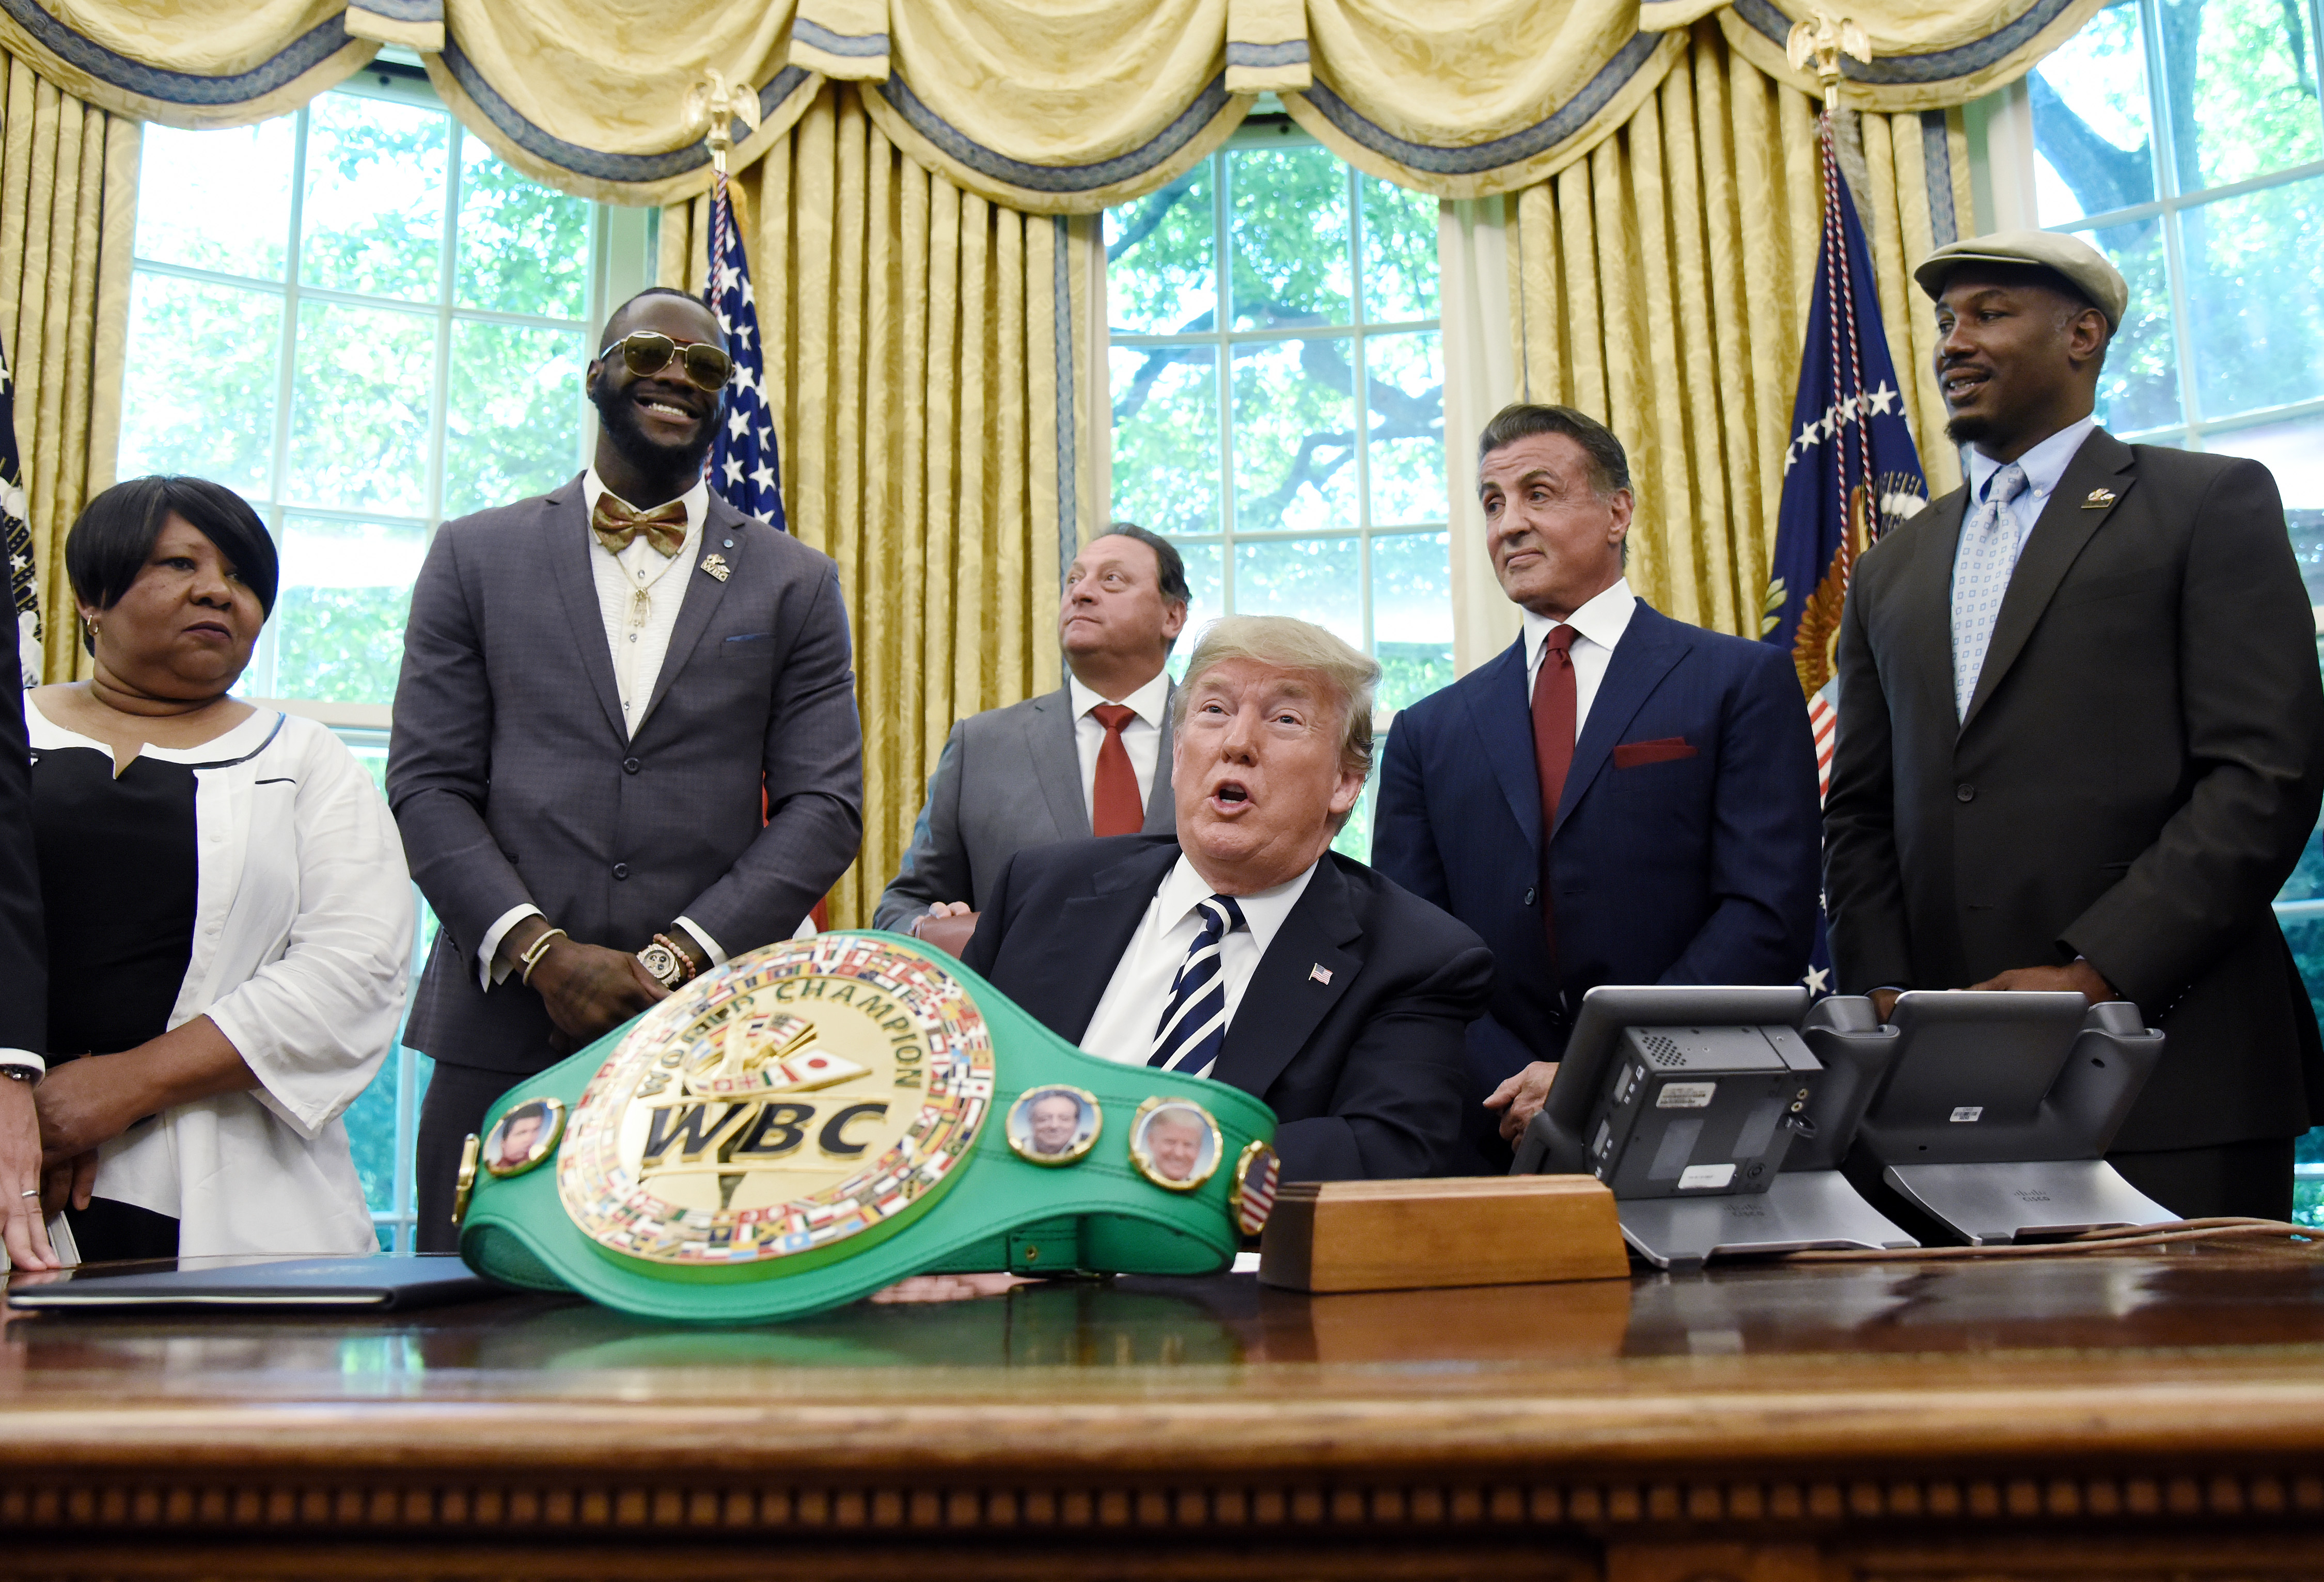 Trump Pardons Boxer Jack Johnson With Stallone at White House